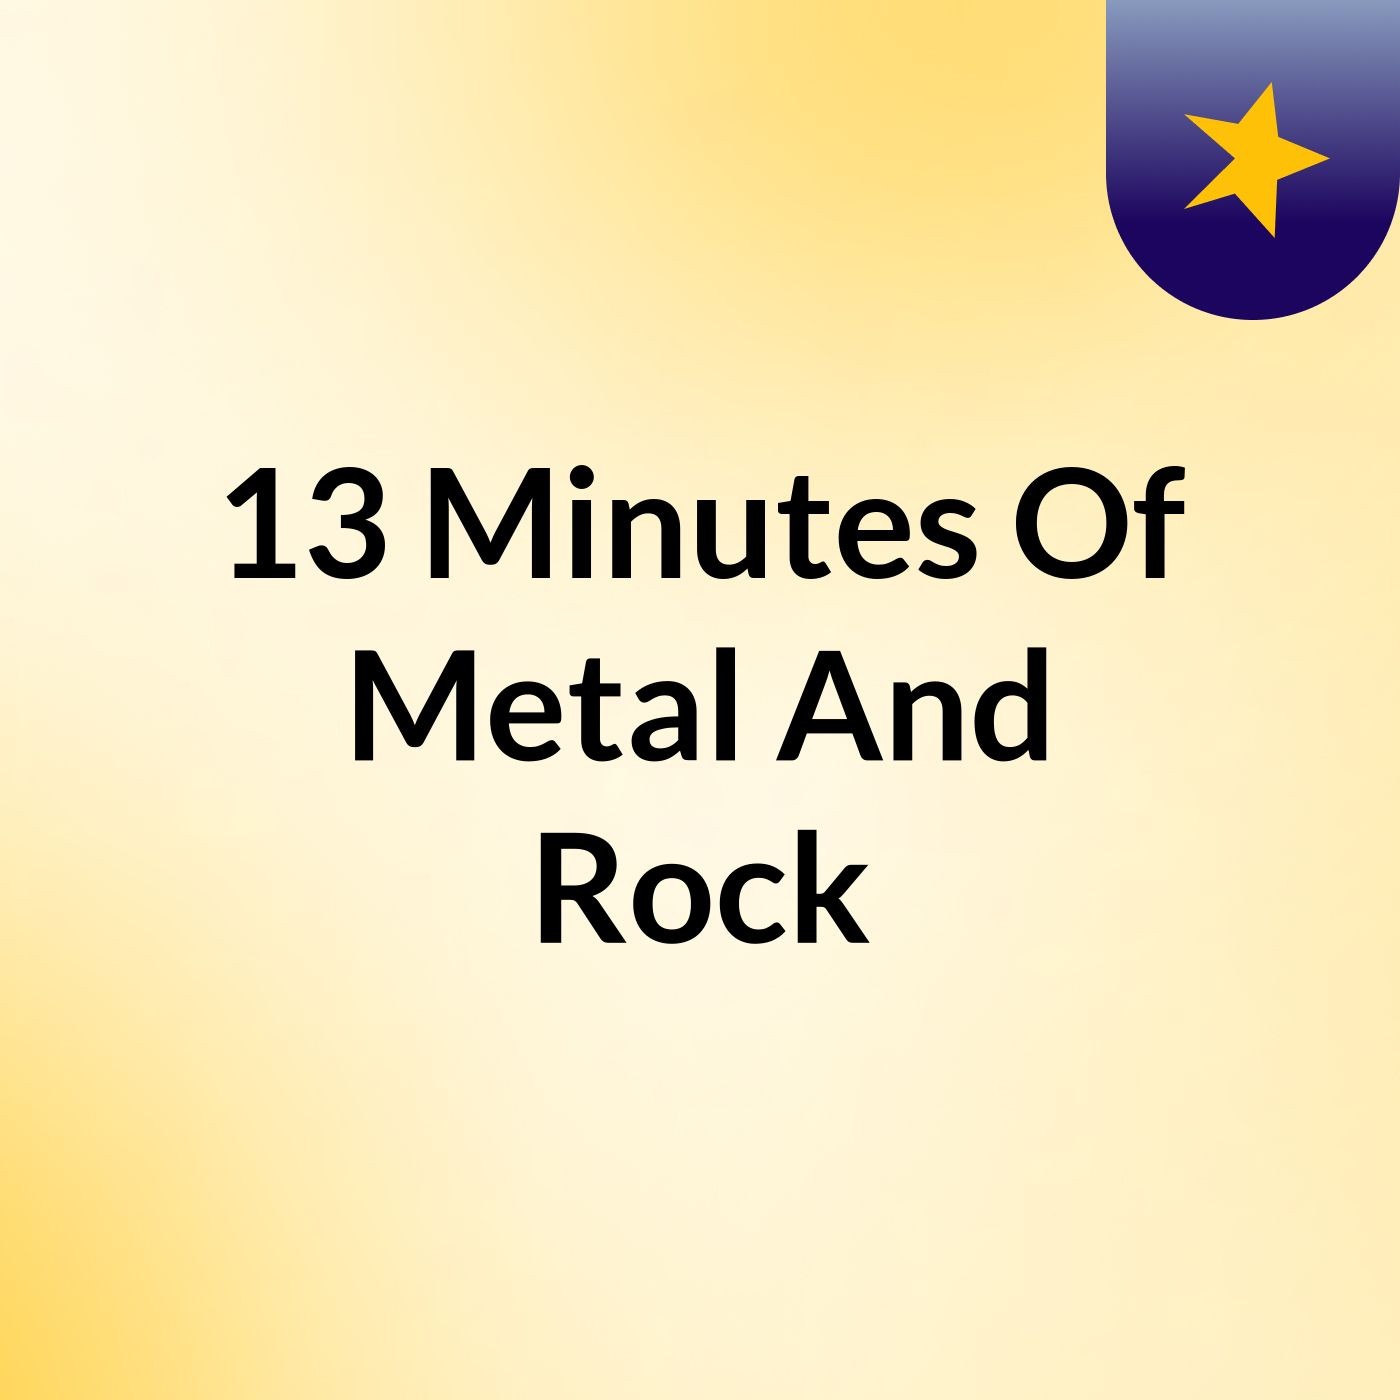 13 Minutes Of Metal And Rock